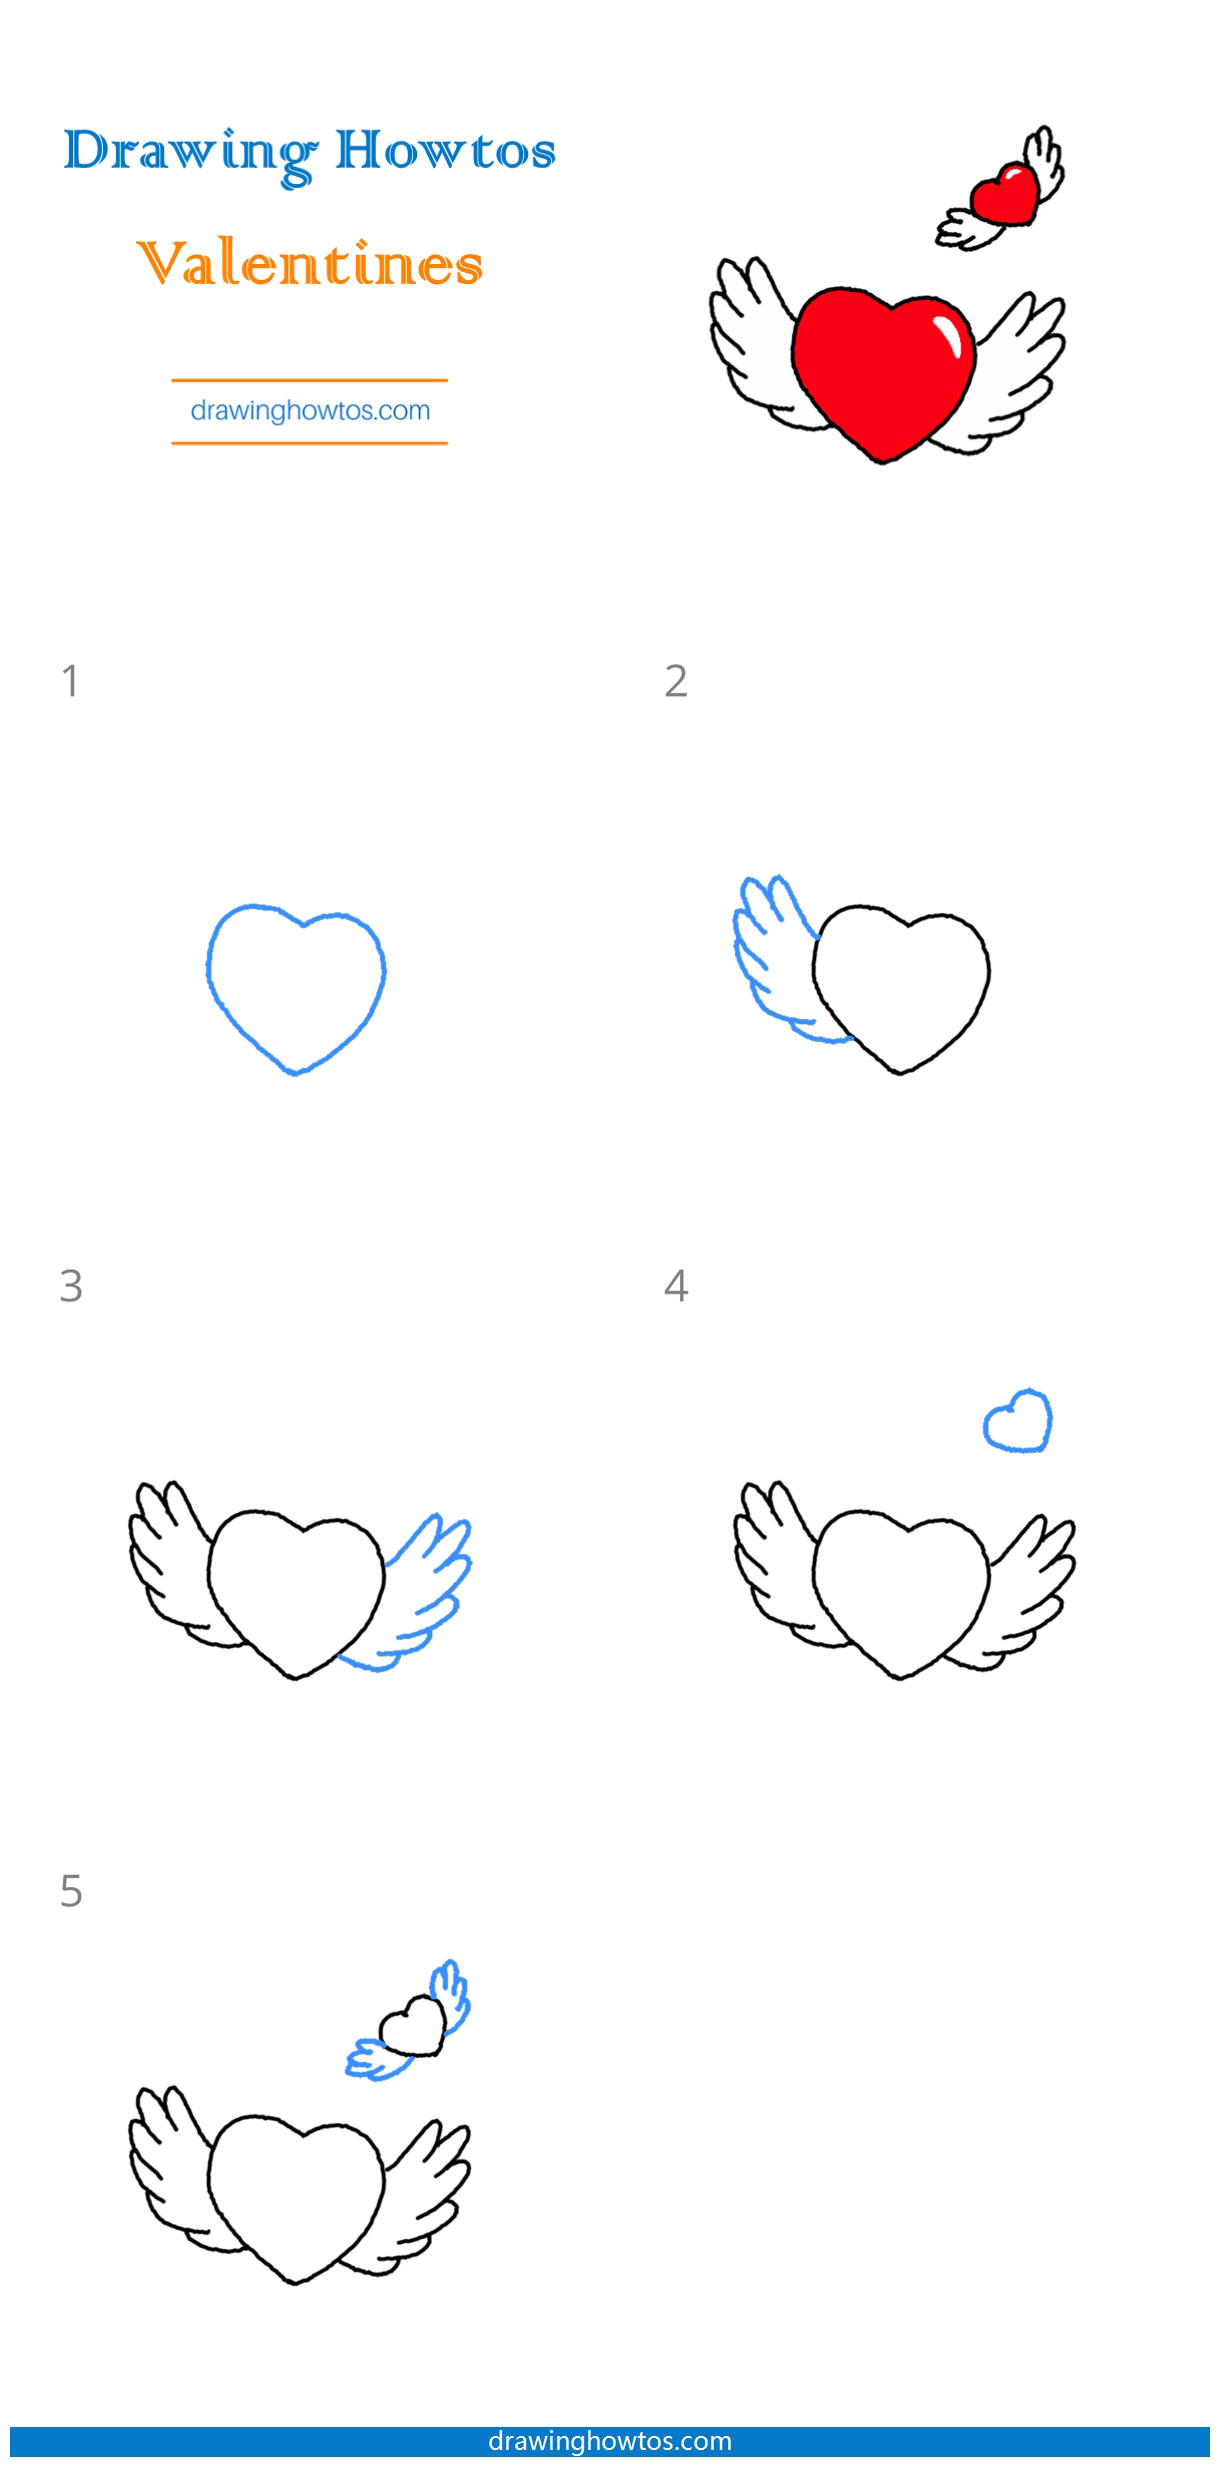 How to Draw a Valentine Picture Step by Step